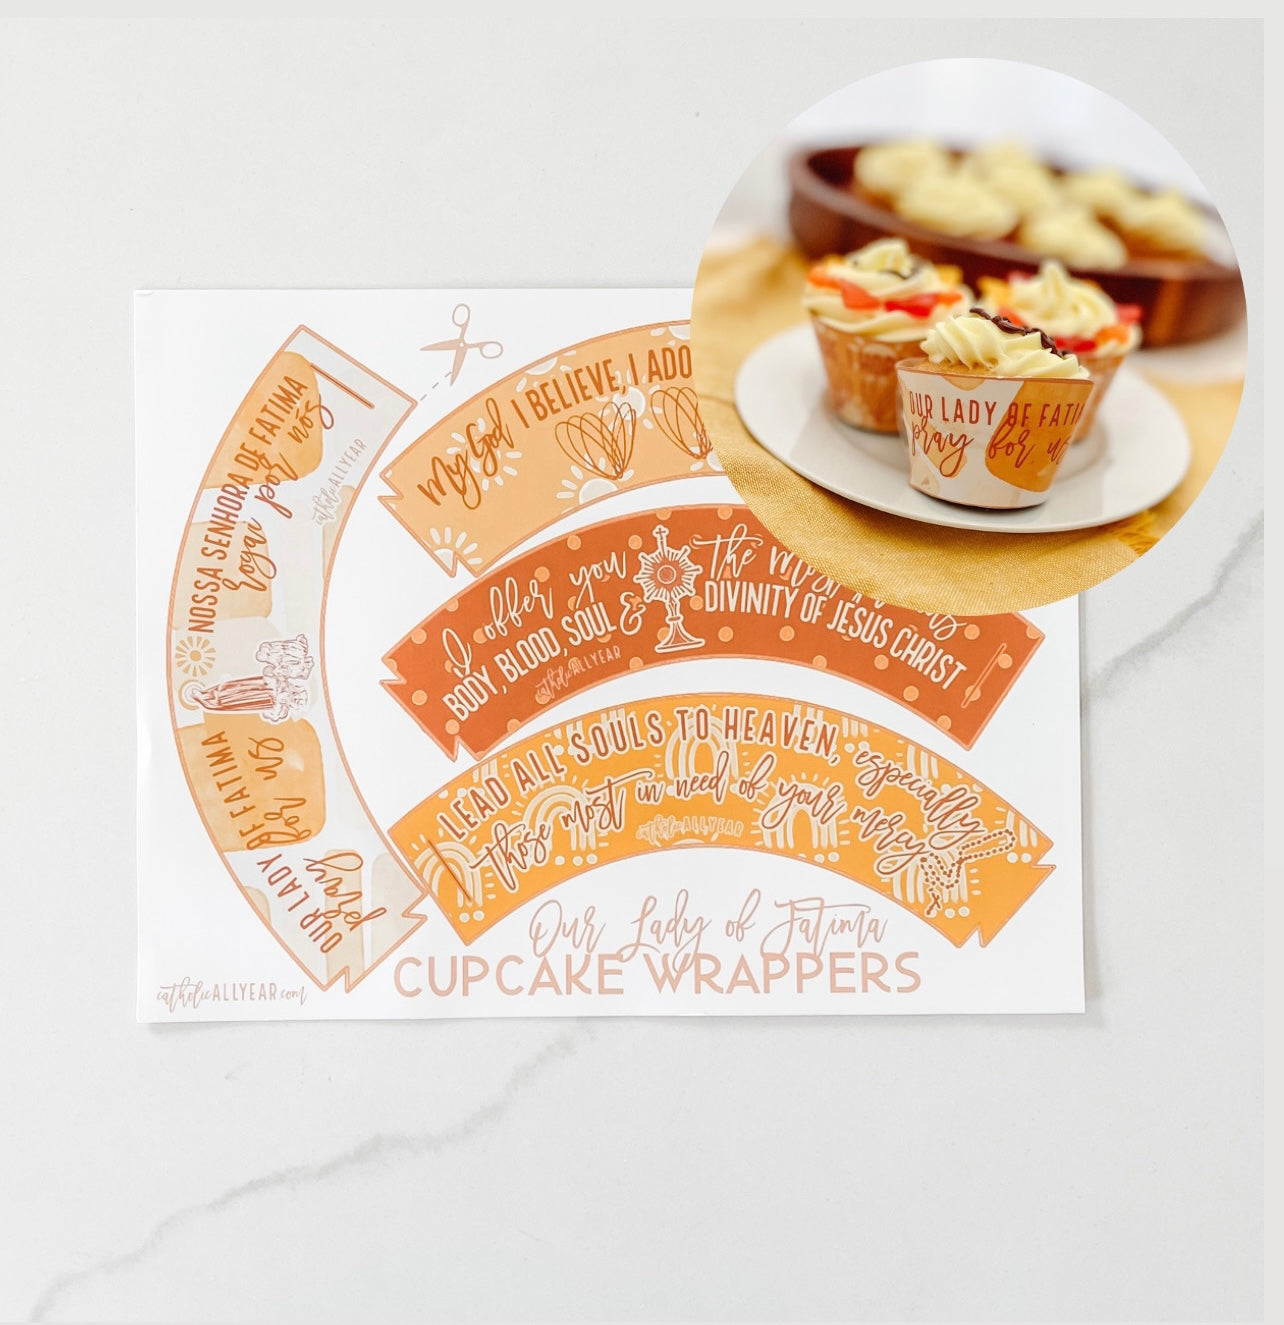 Our Lady of Fatima Cupcake Wrappers